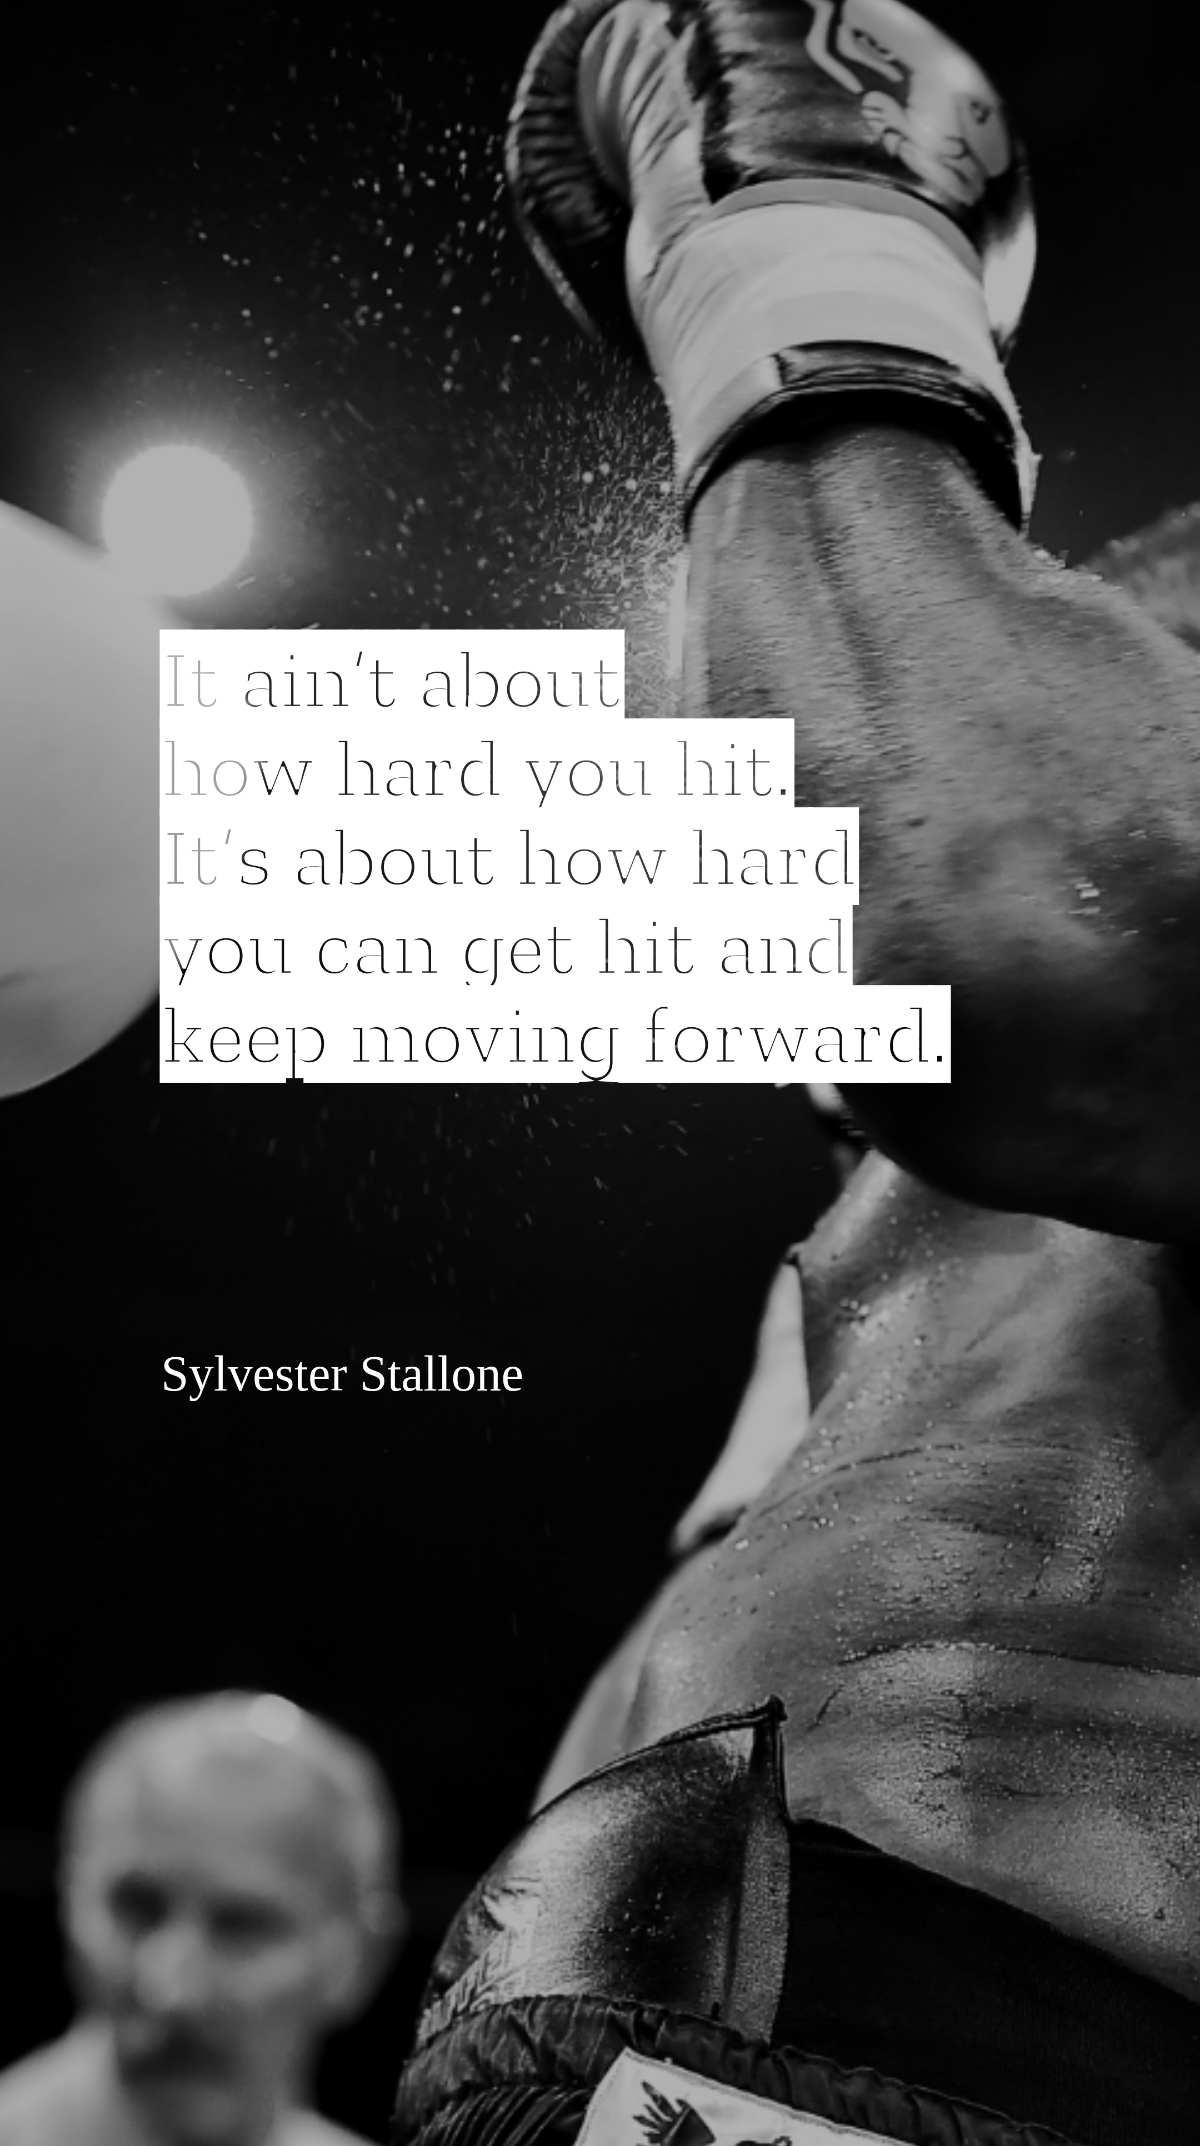 Sylvester Stallone - It ain’t about how hard you hit. It’s about how hard you can get hit and keep moving forward.